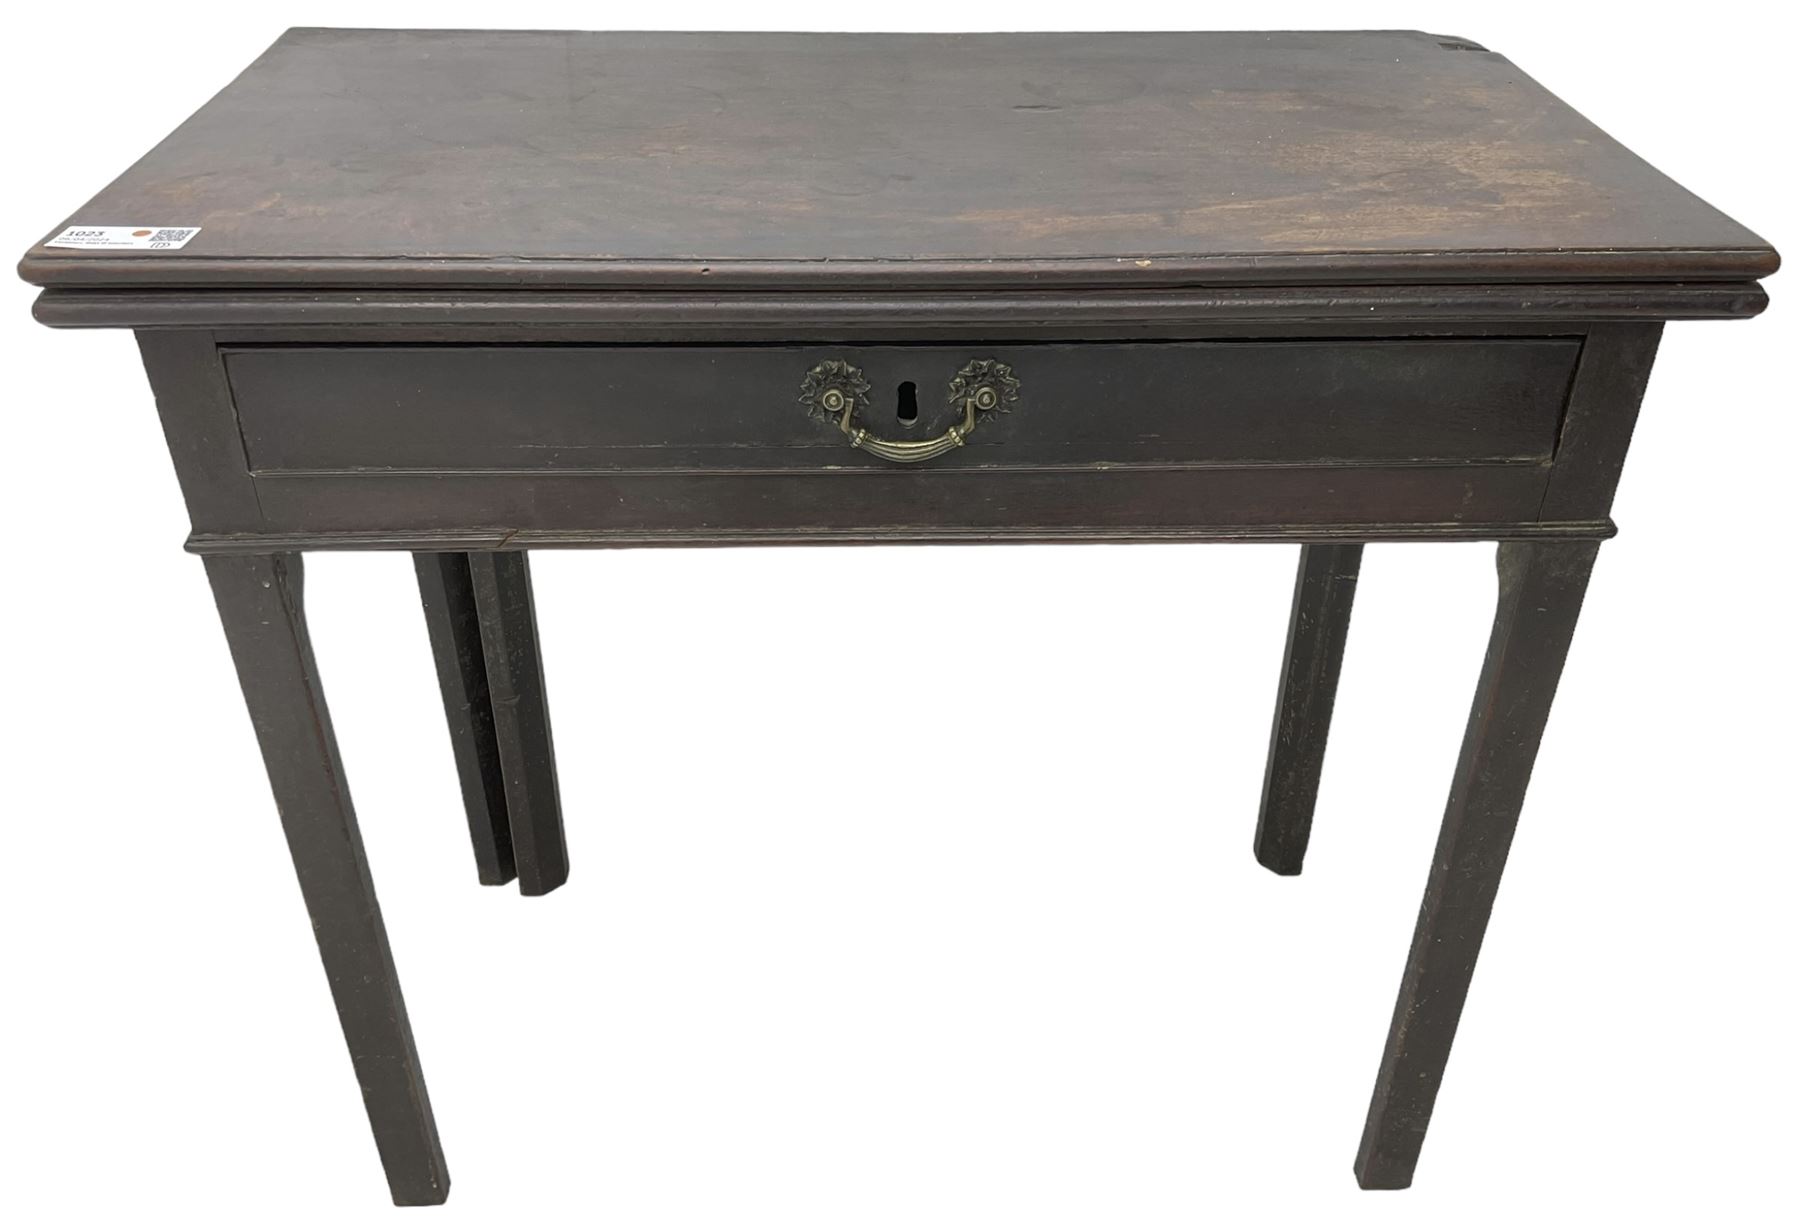 Mid-to-late 18th century mahogany card table - Image 2 of 6